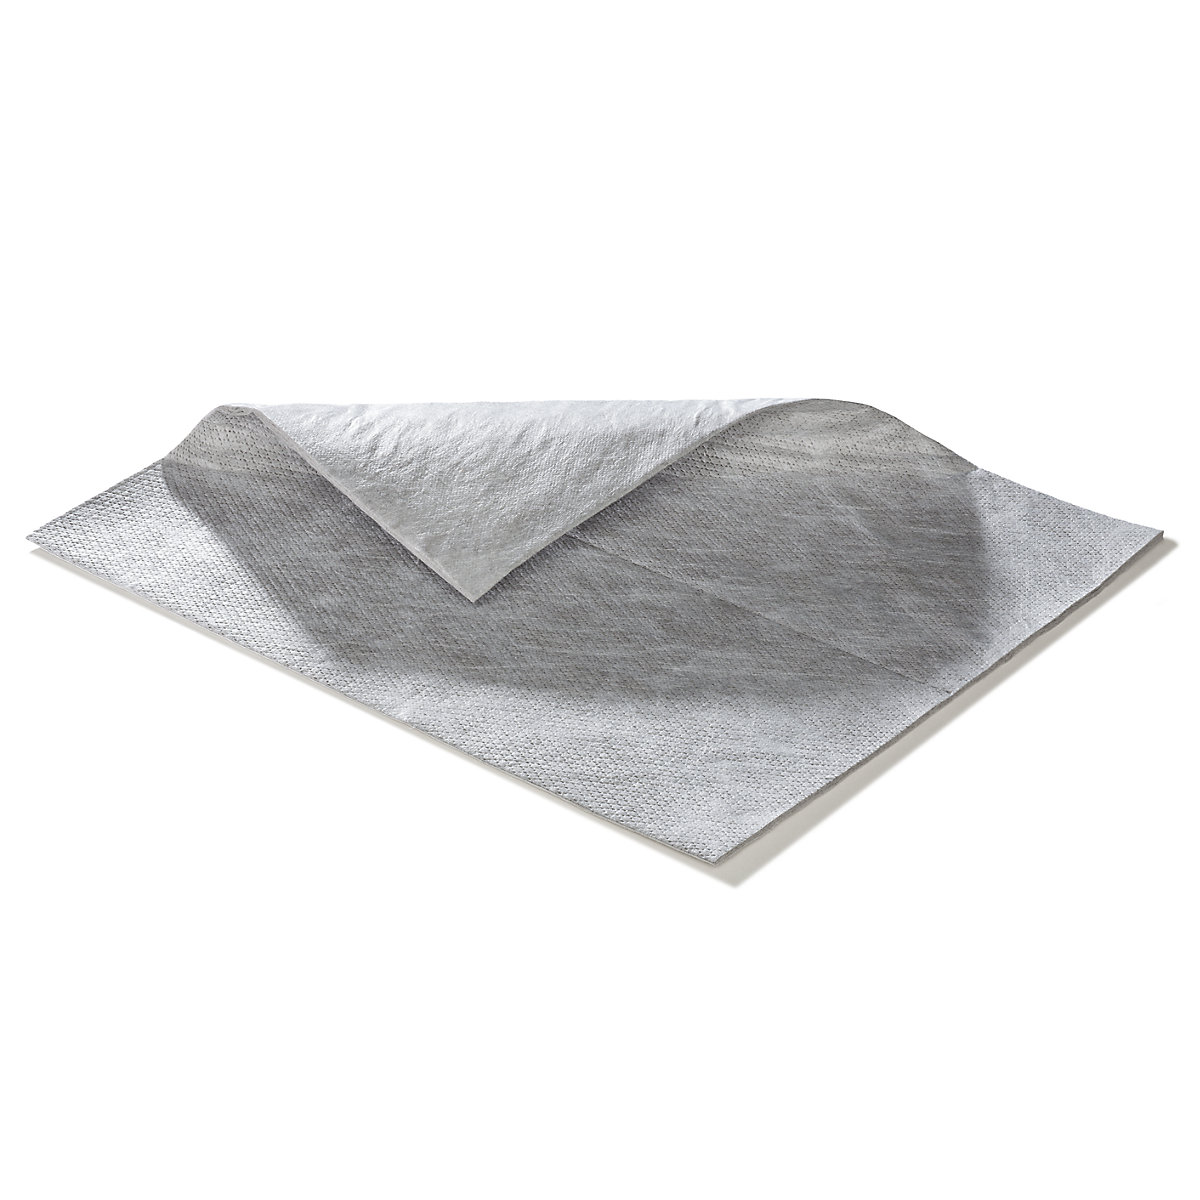 PRO absorbent sheeting, towels 500 x 400 mm, pack of 100, universal-10